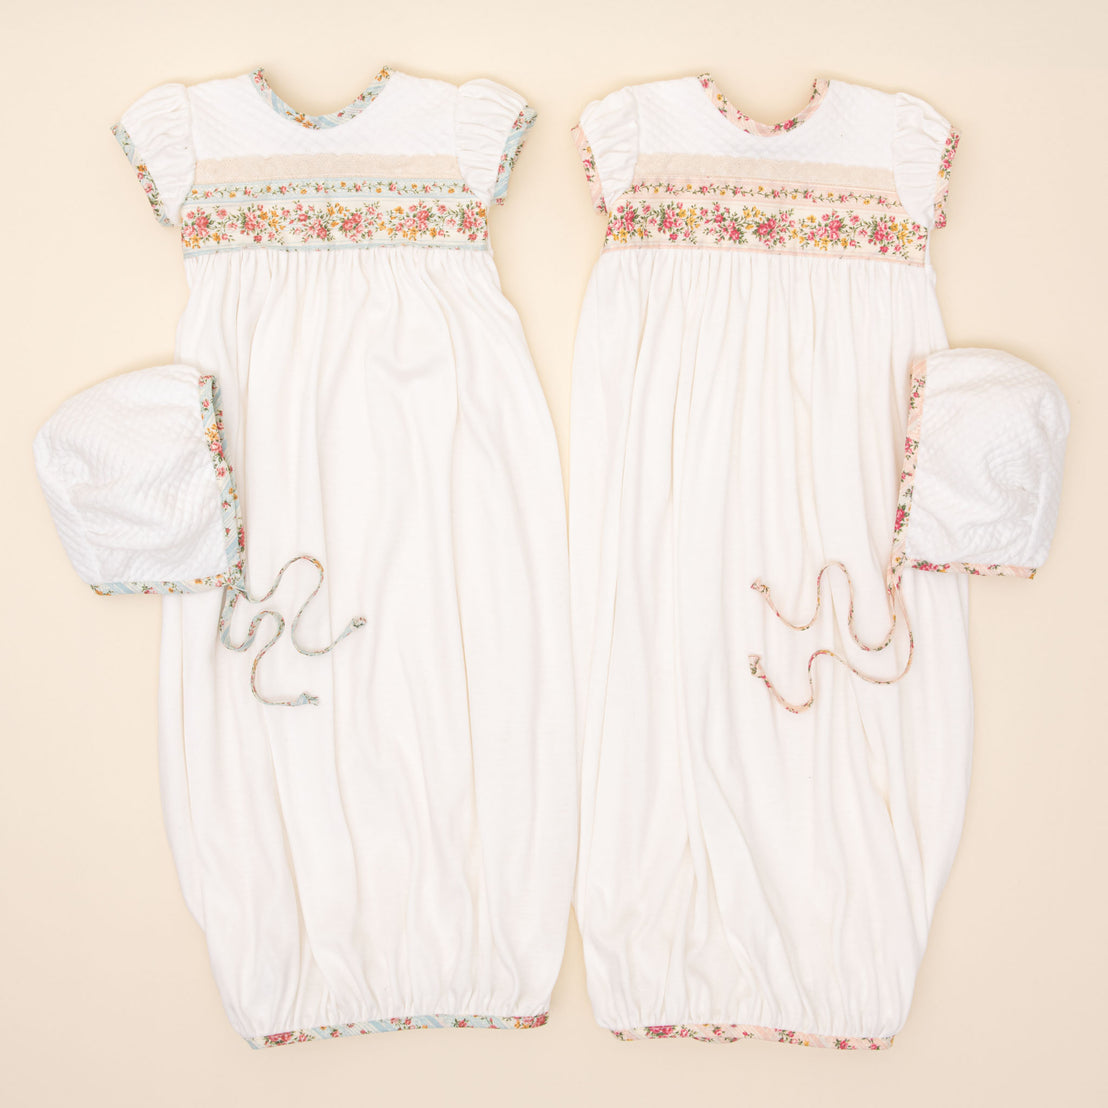 Flat lay photo comparison of the "Powder Blue" and "Blush" Eloise Layette Gown and Eloise Bonnet.